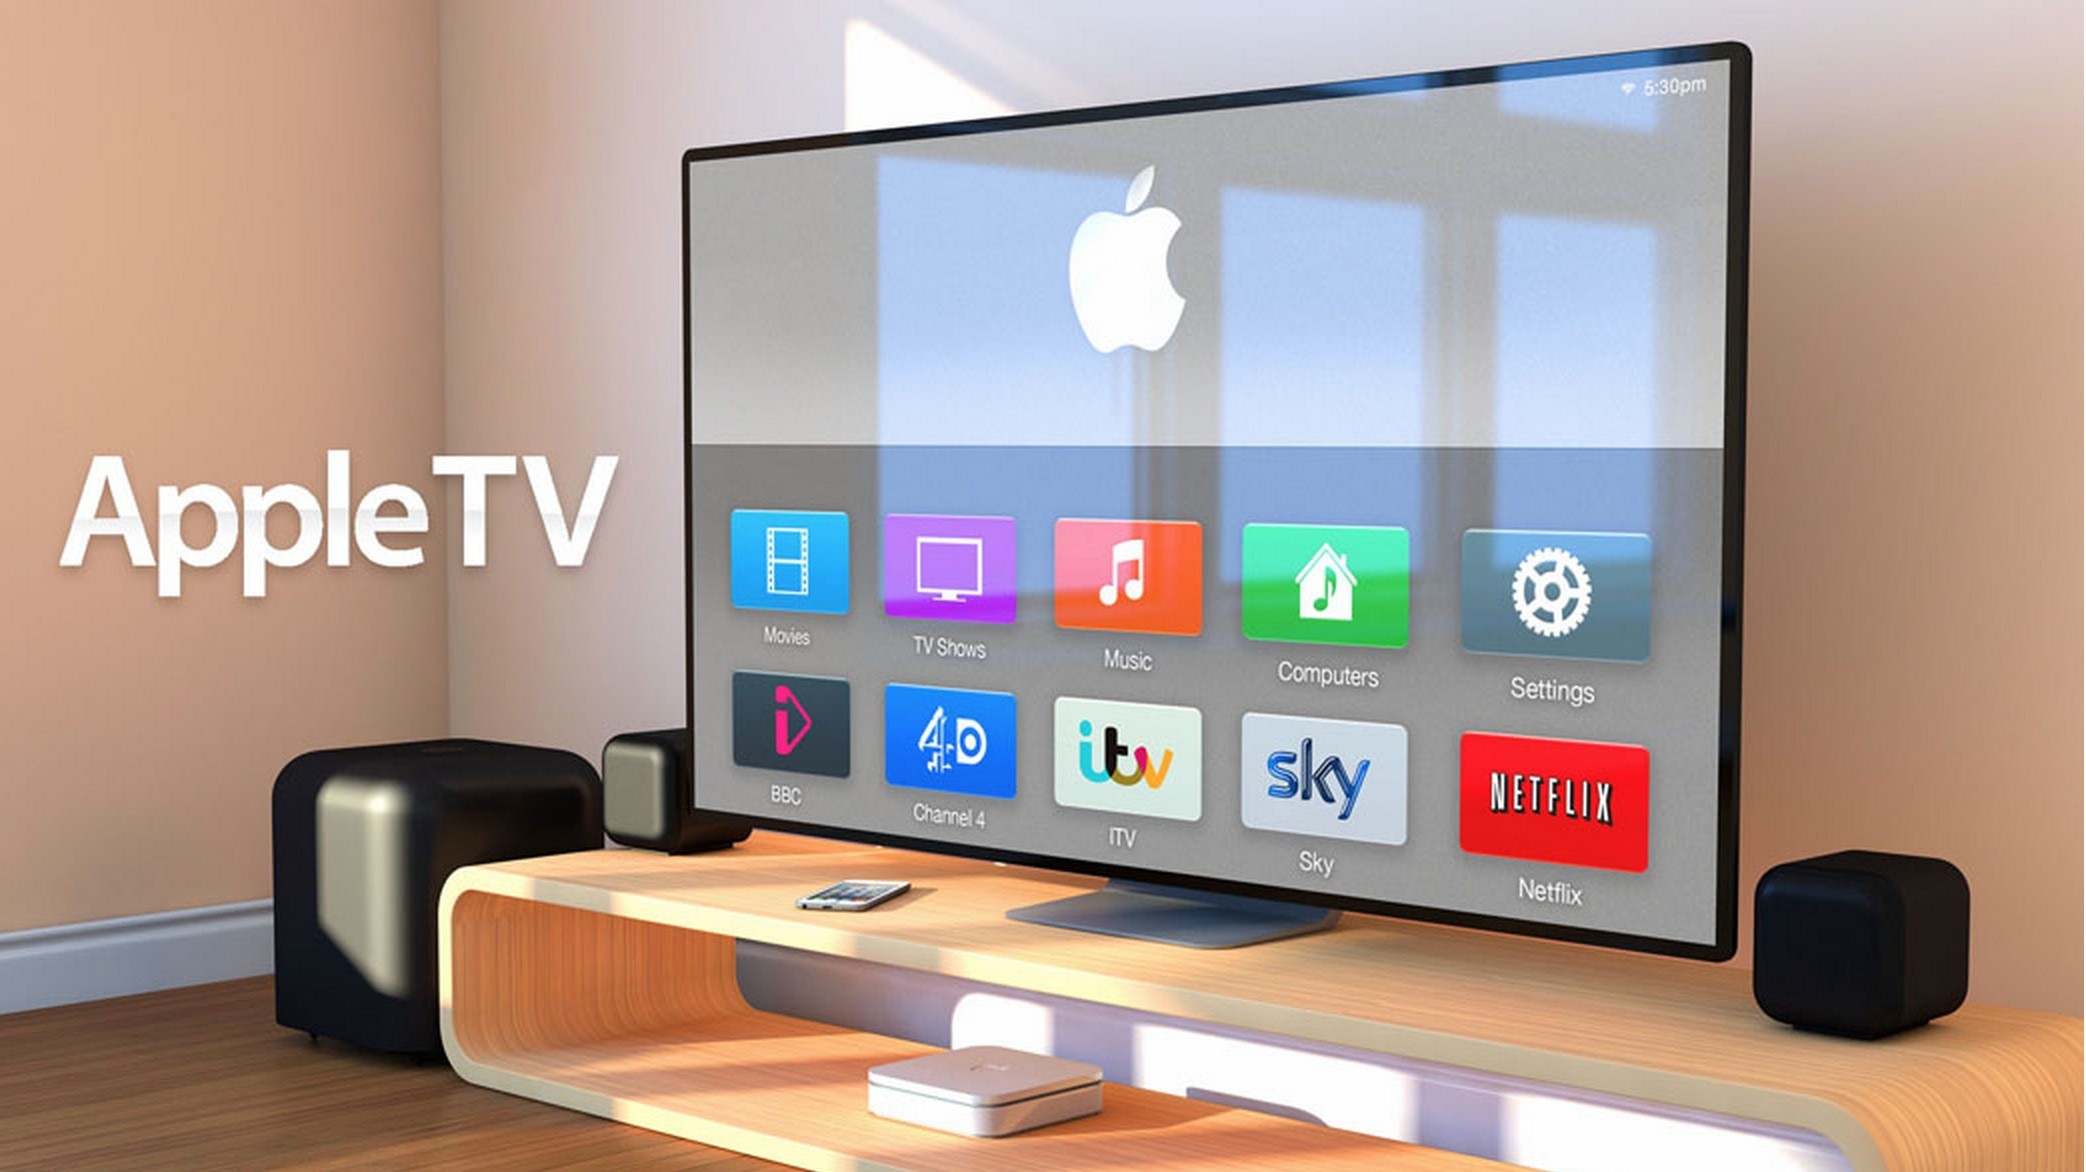 The newest Apple TV highlights a worrying trend across all 